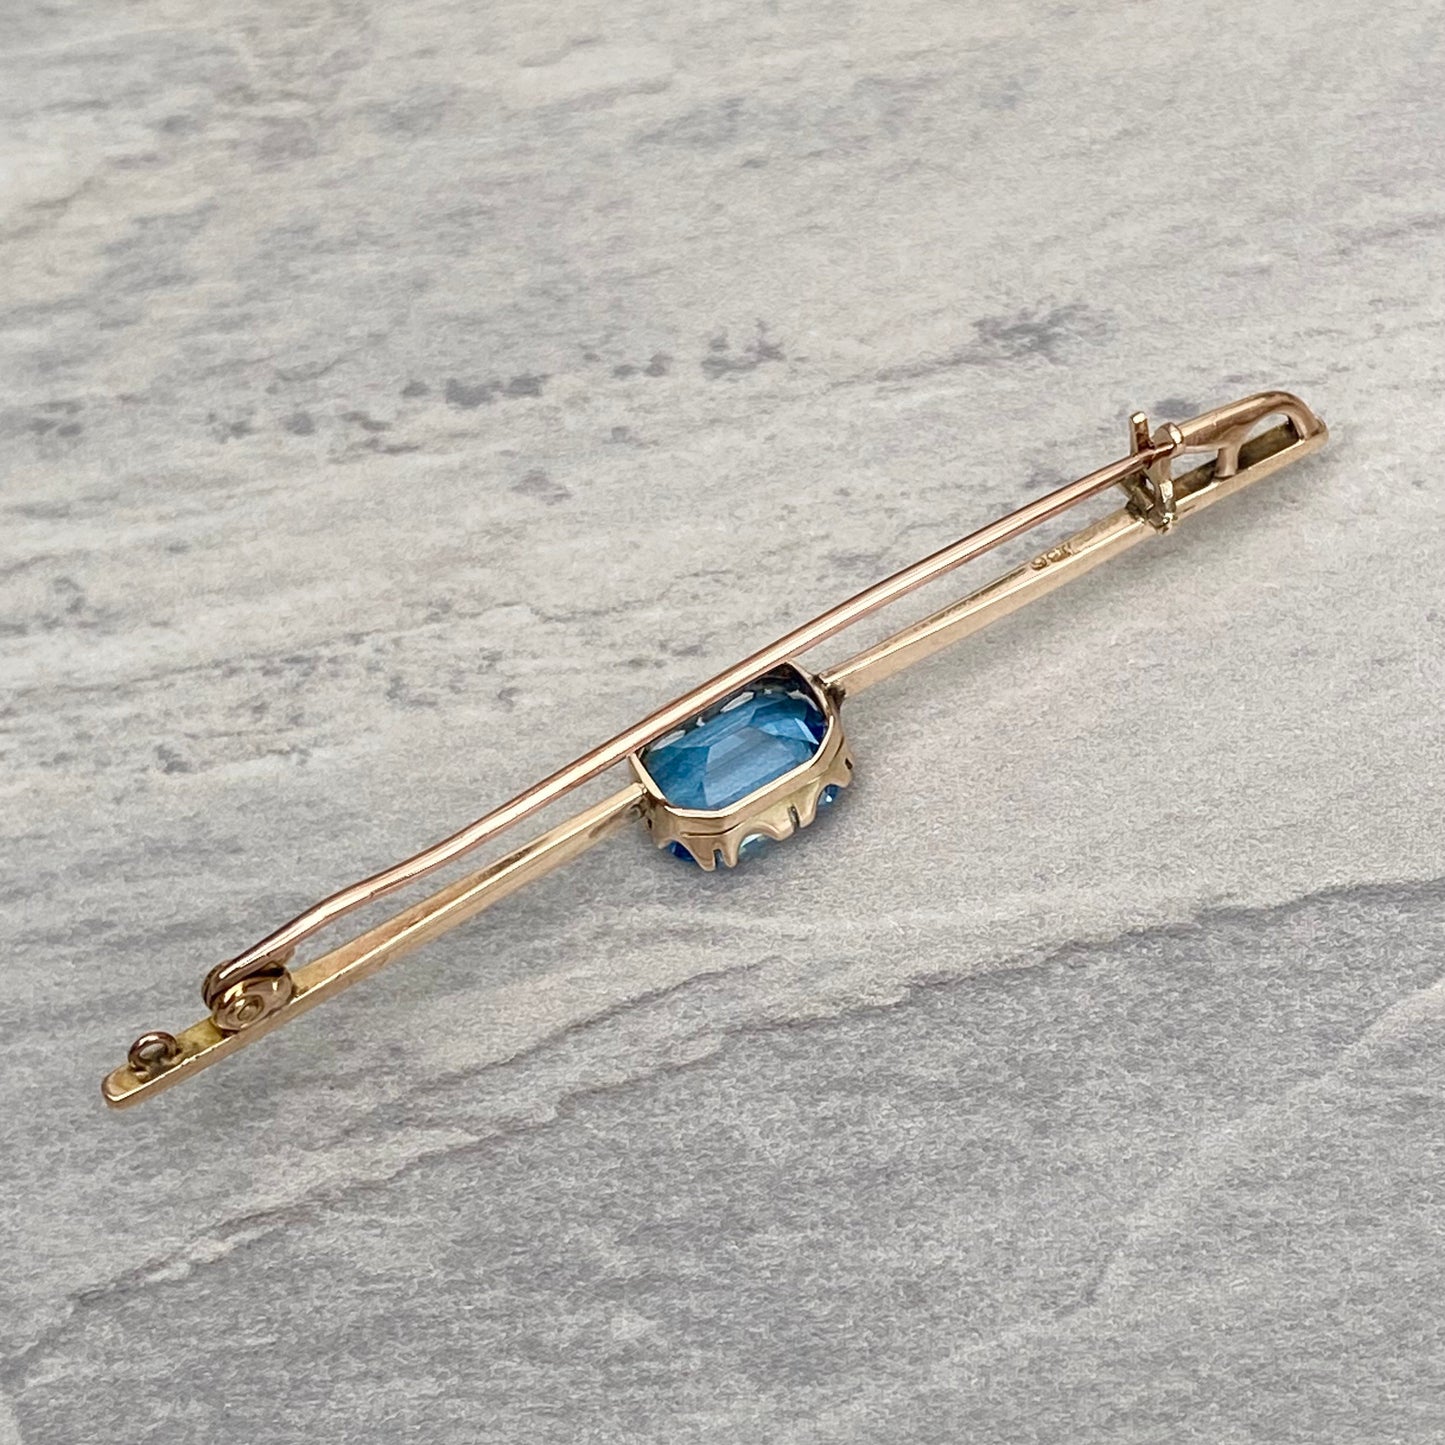 Vintage 9ct yellow gold blue glass brooch